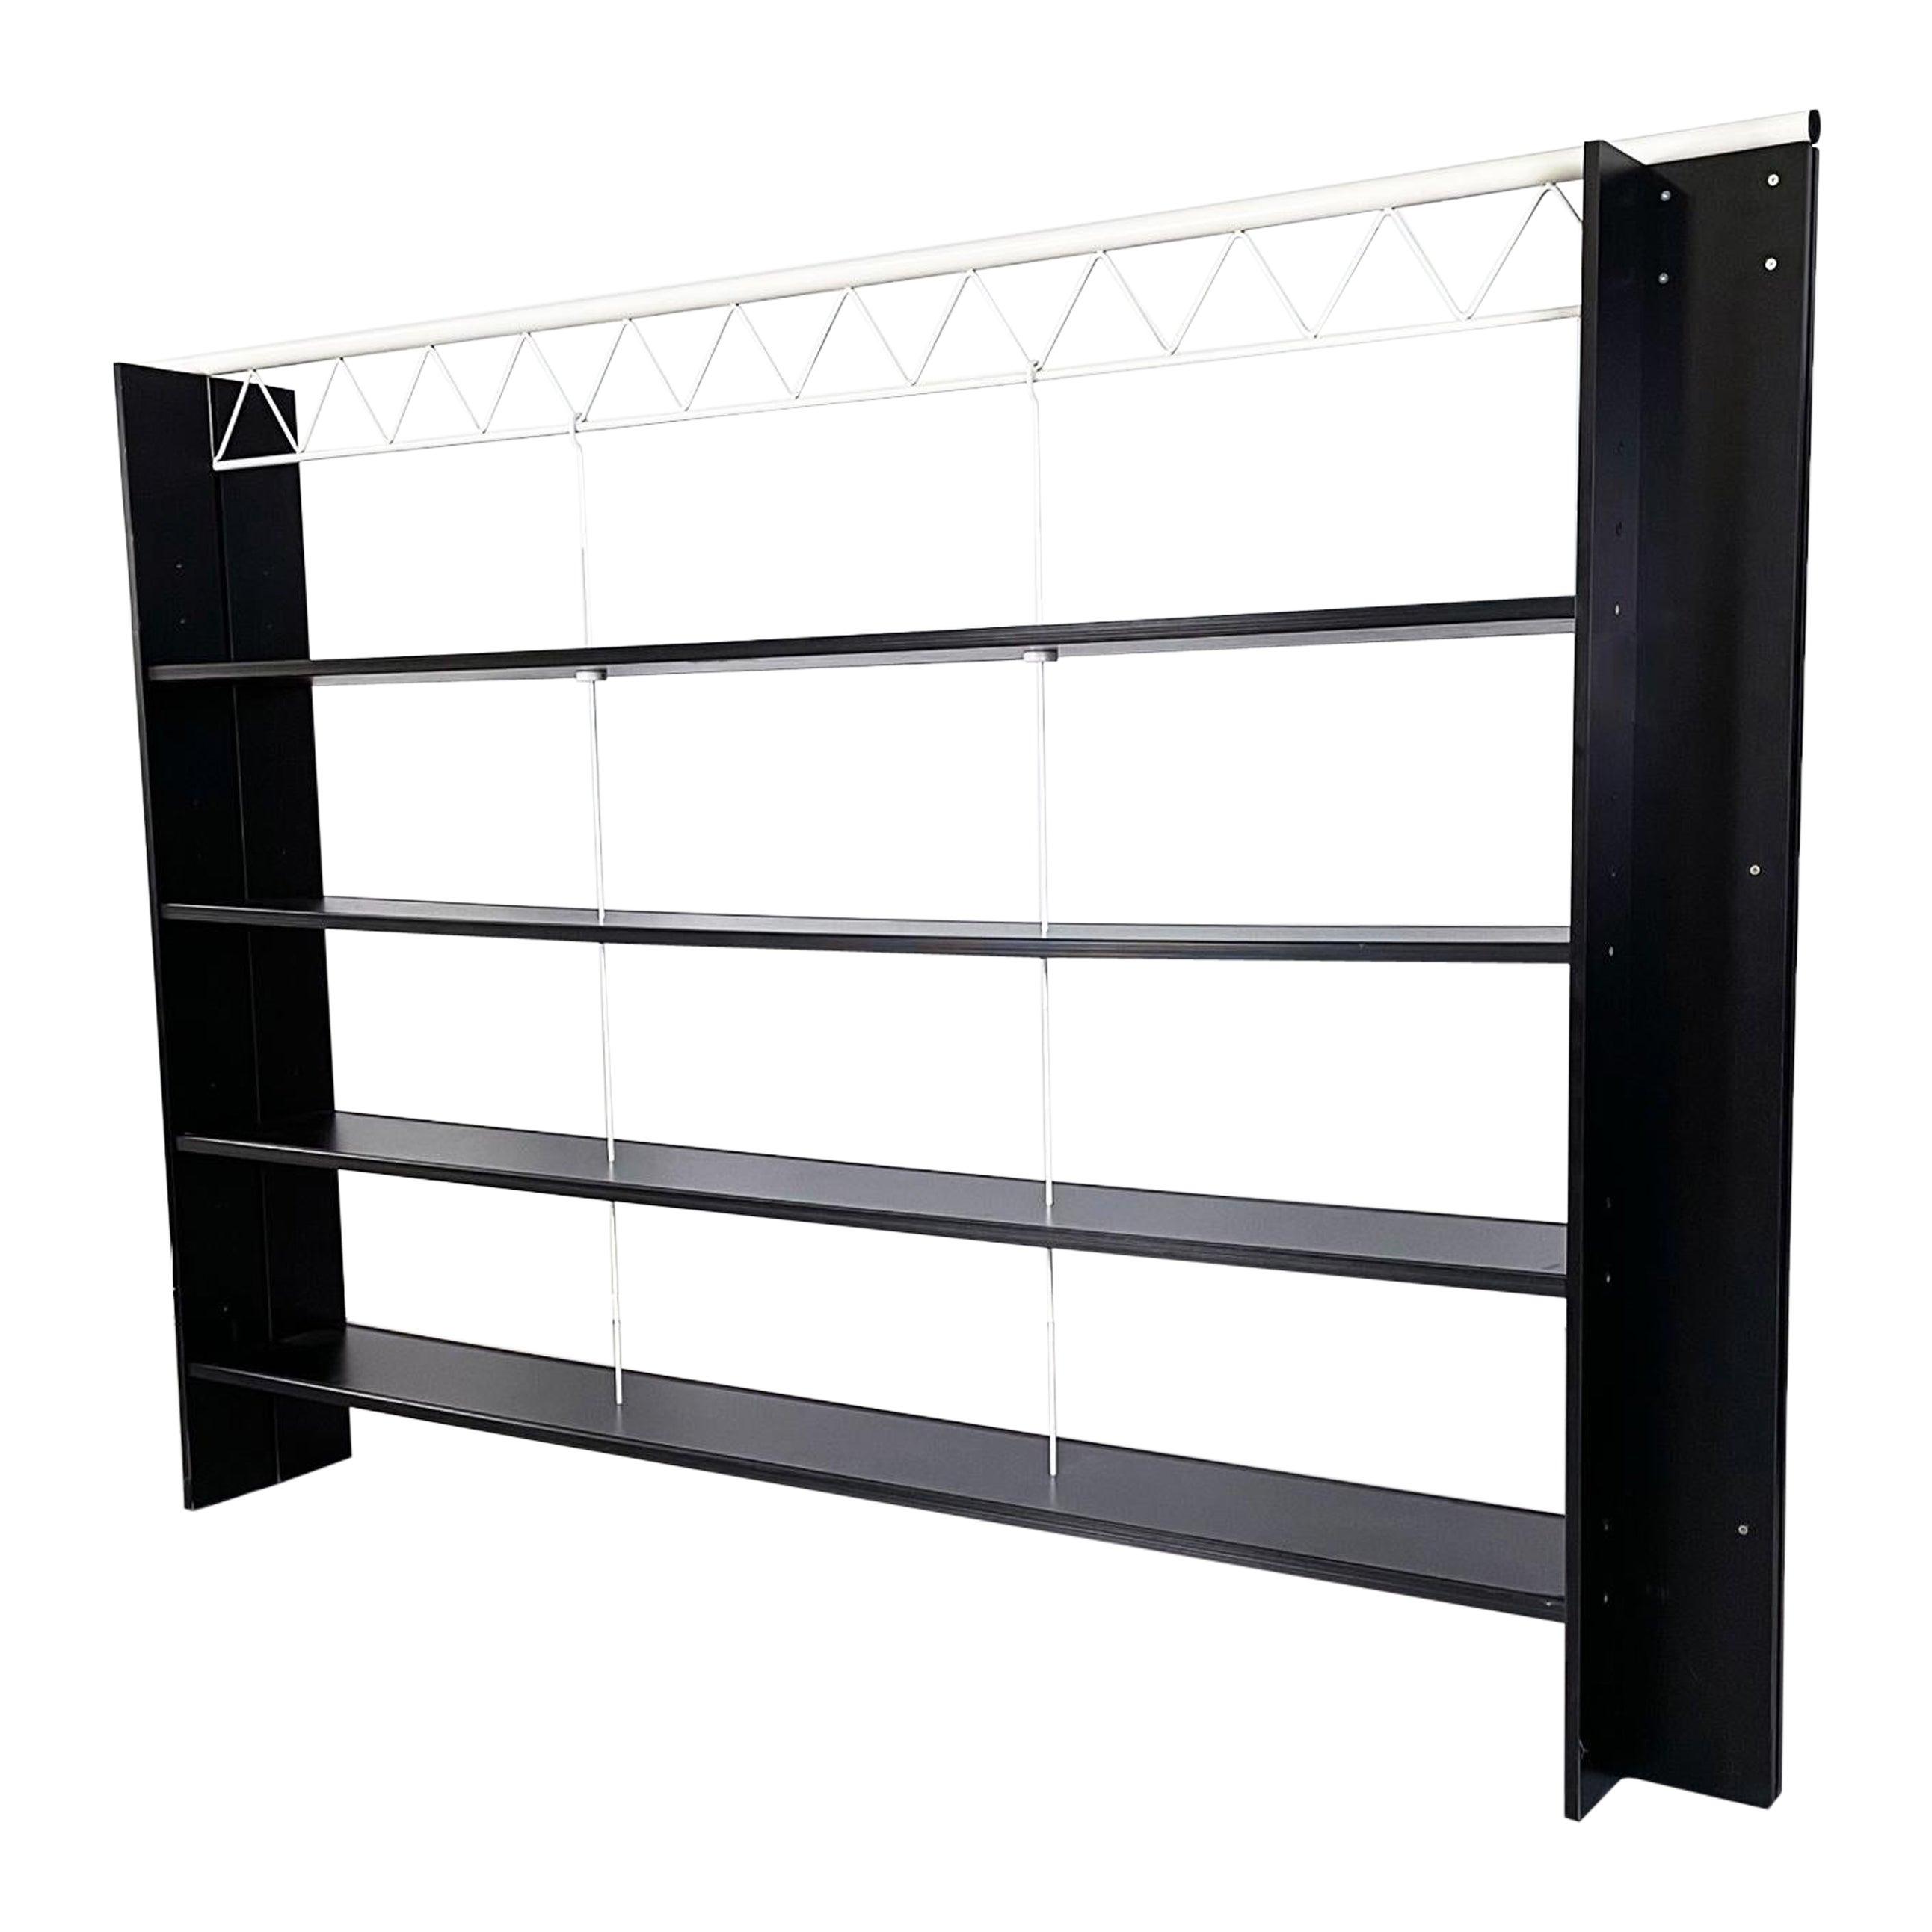 Italian Mid-Century Moden Black Bookcase Brooklyn by Stoppino and Acerbis, 1980s For Sale